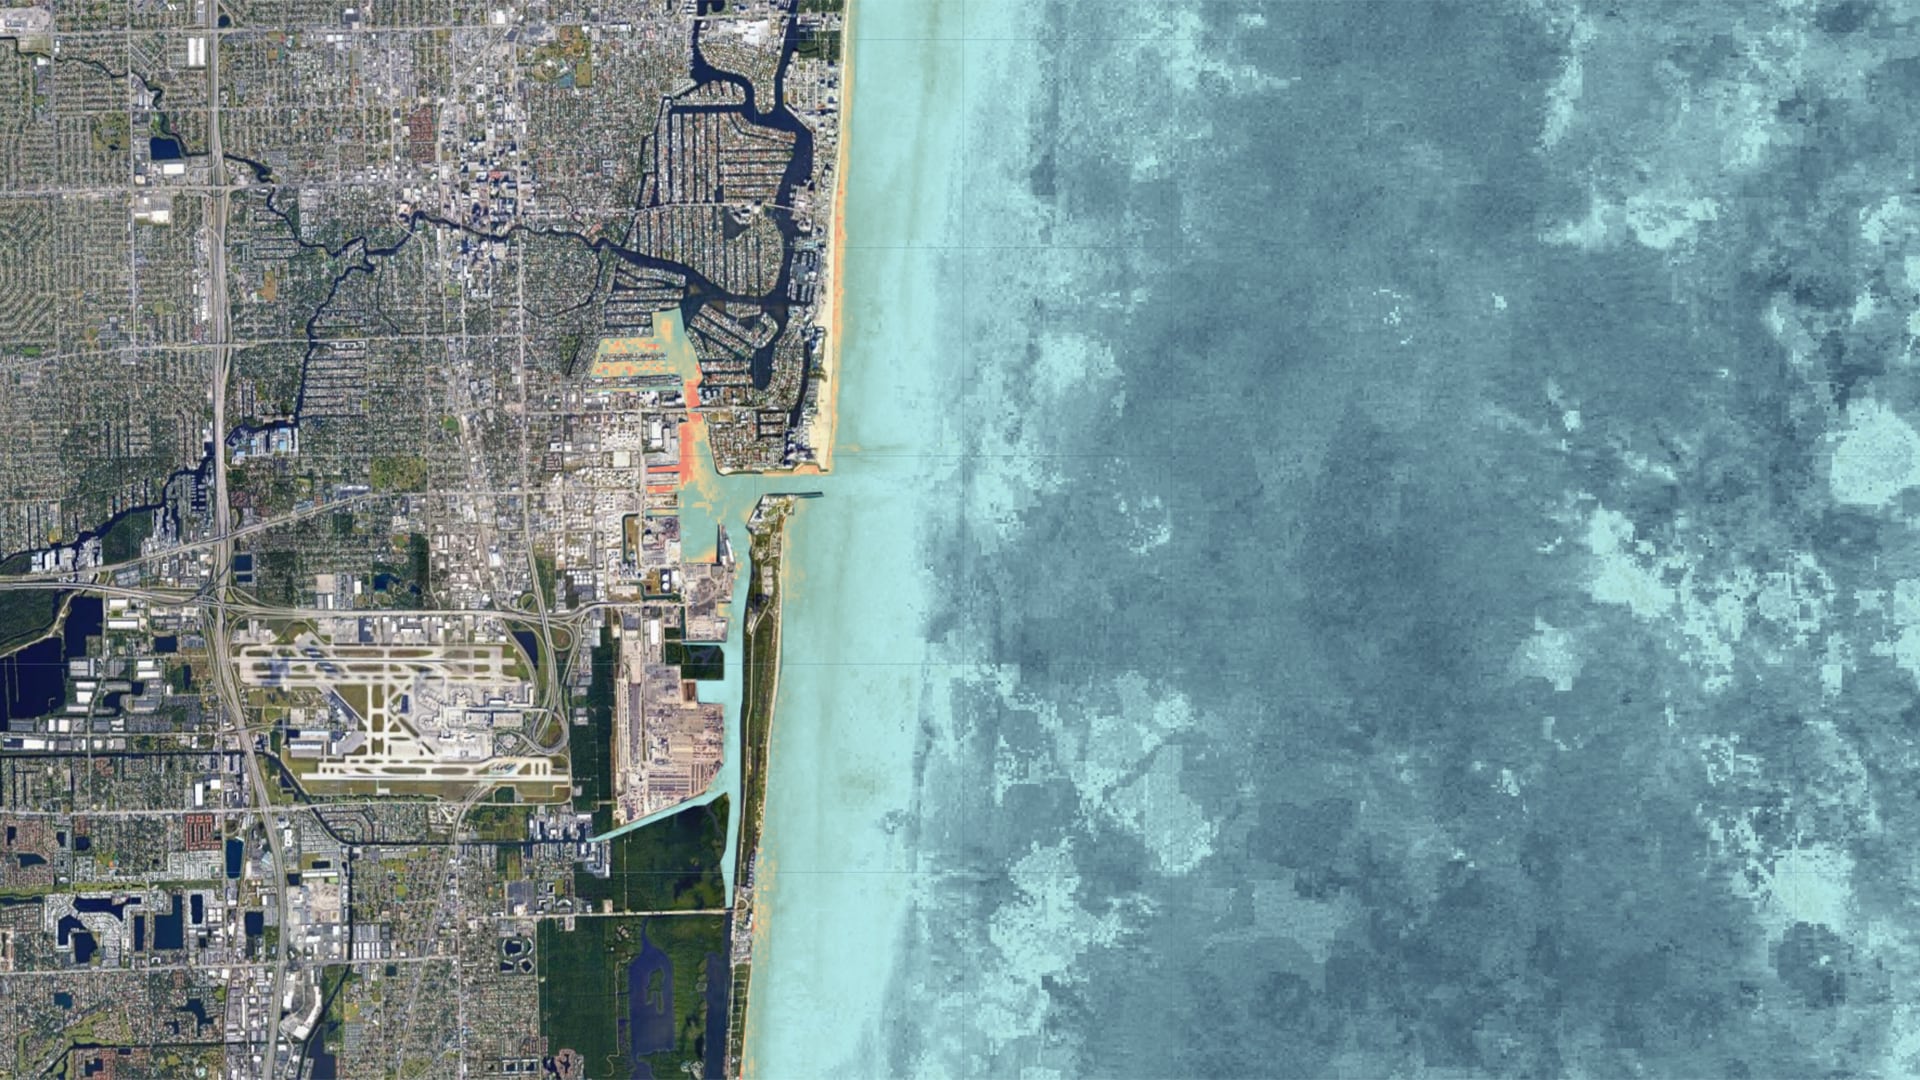 Diffuse Light Attenuation Coefficient (Kd(490)) processed image utilizing 2020 Landsat 8 OLI remote sensing data, showcasing turbidity within Port Everglades. Port Everglades is located along the Eastern Coast of Florida, south of Fort Lauderdale. Darker shades of blue represent lower levels of Kd(490), implying clearer, and generally healthier, water. Brown and orange represent high levels of Kd(490), generally indicating cloudier water conditions, which pose a threat to coral and coral reef health.  Keywords: Kd(490), Landsat 8 OLI, Coral, Port, Florida